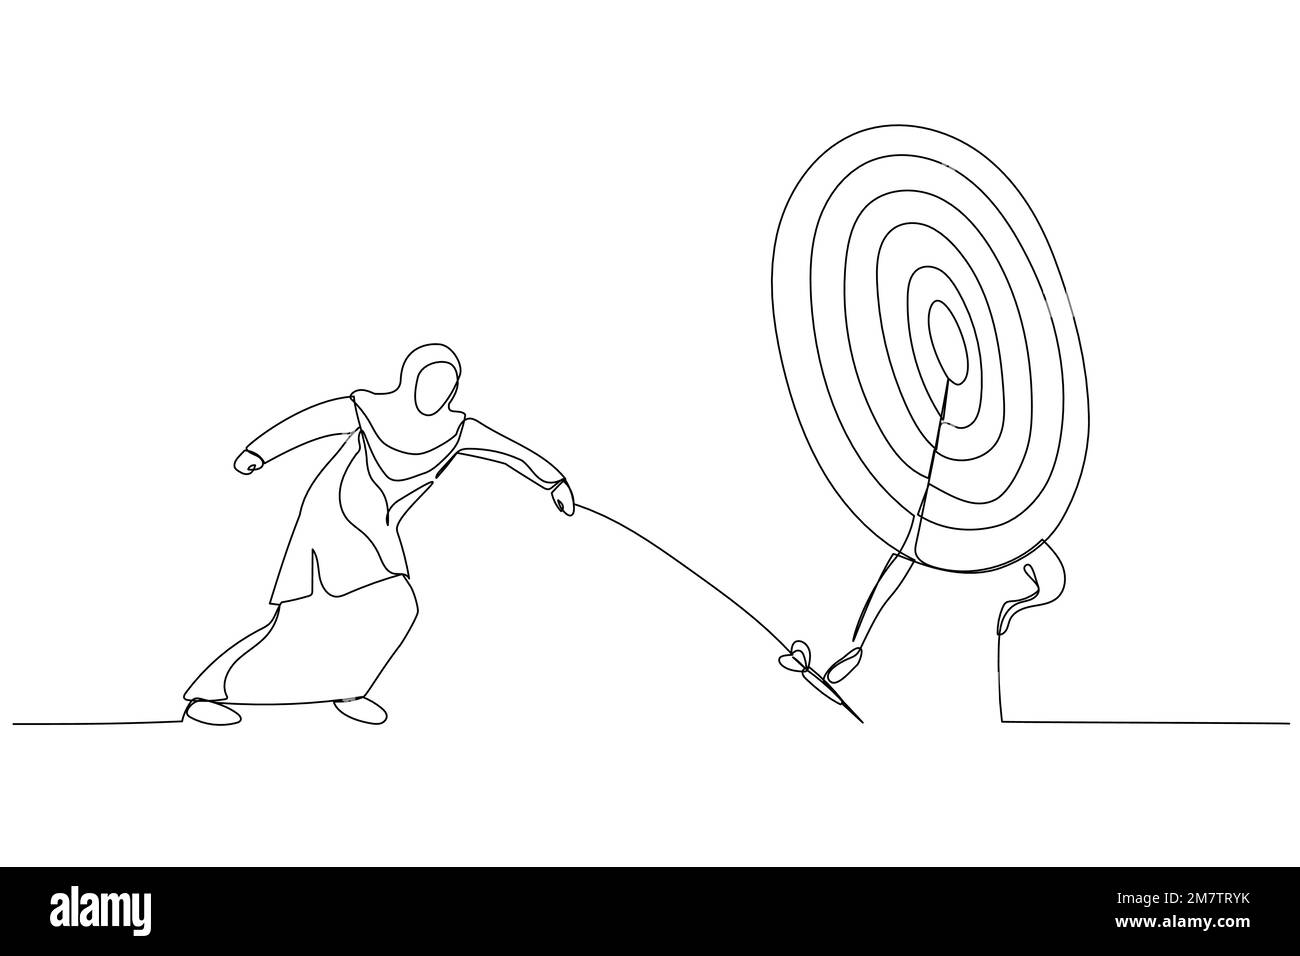 Cartoon of businesswoman try to hit a target. Single line art style Stock Vector